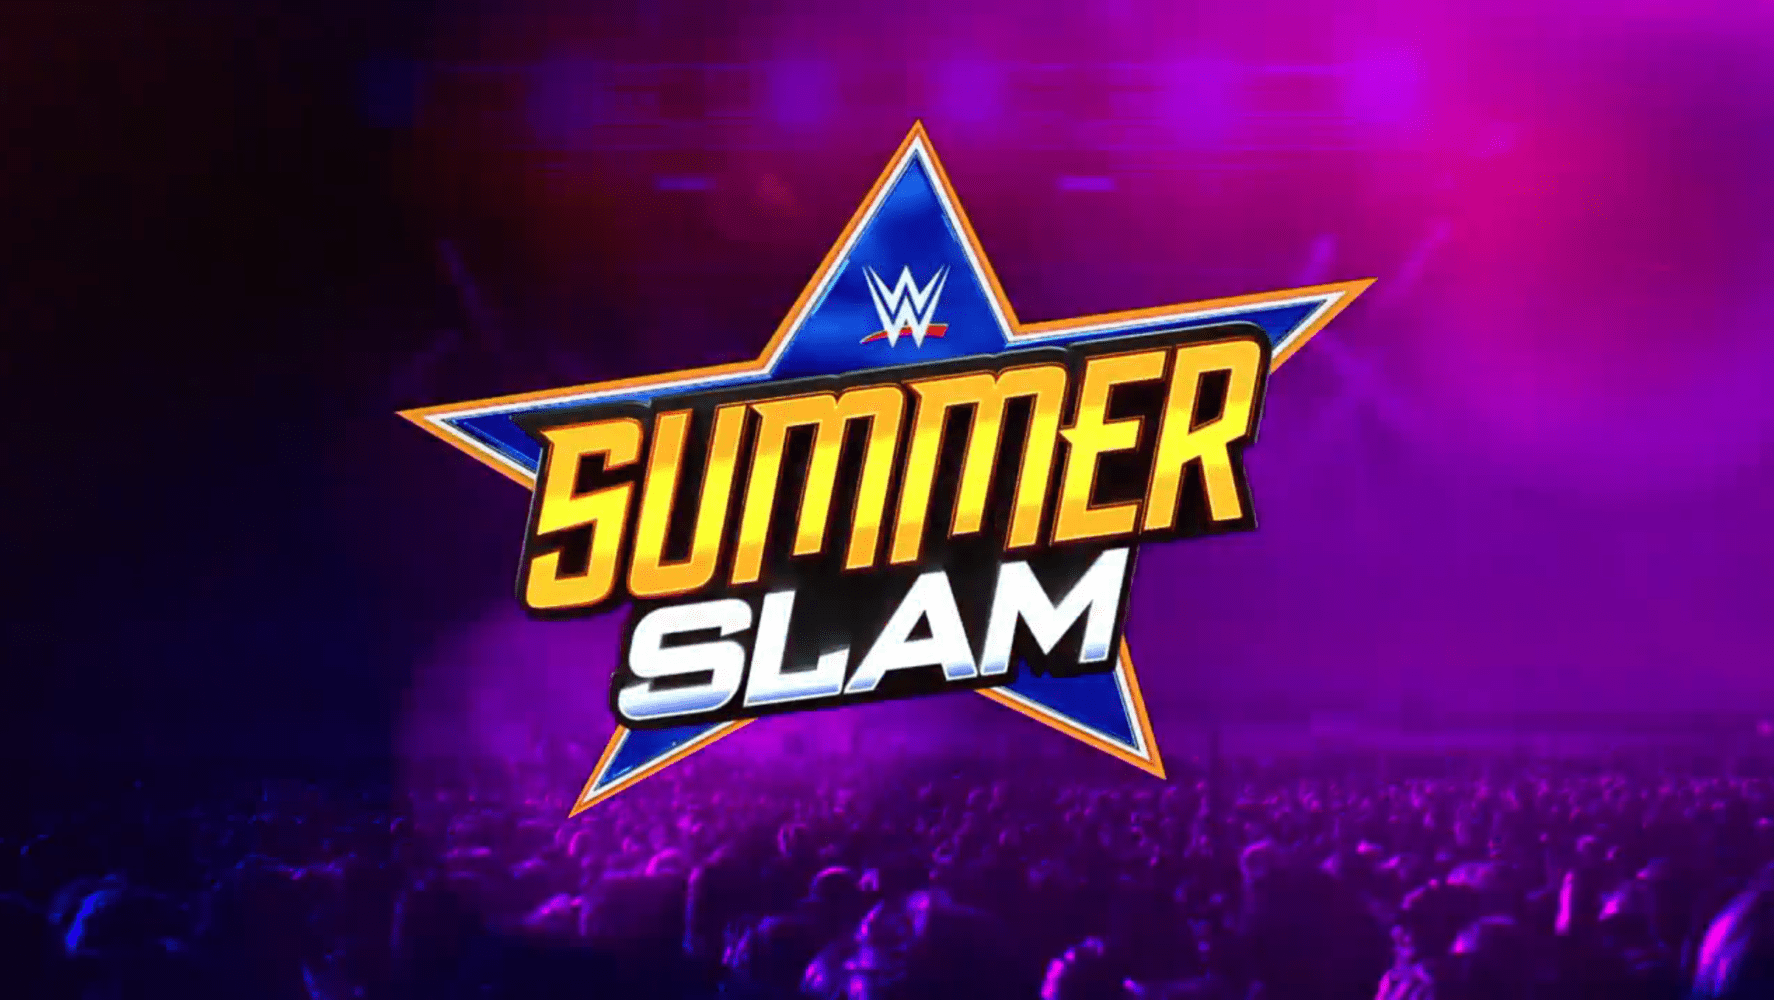 WWE Announces New Match for SummerSlam, Updated Card